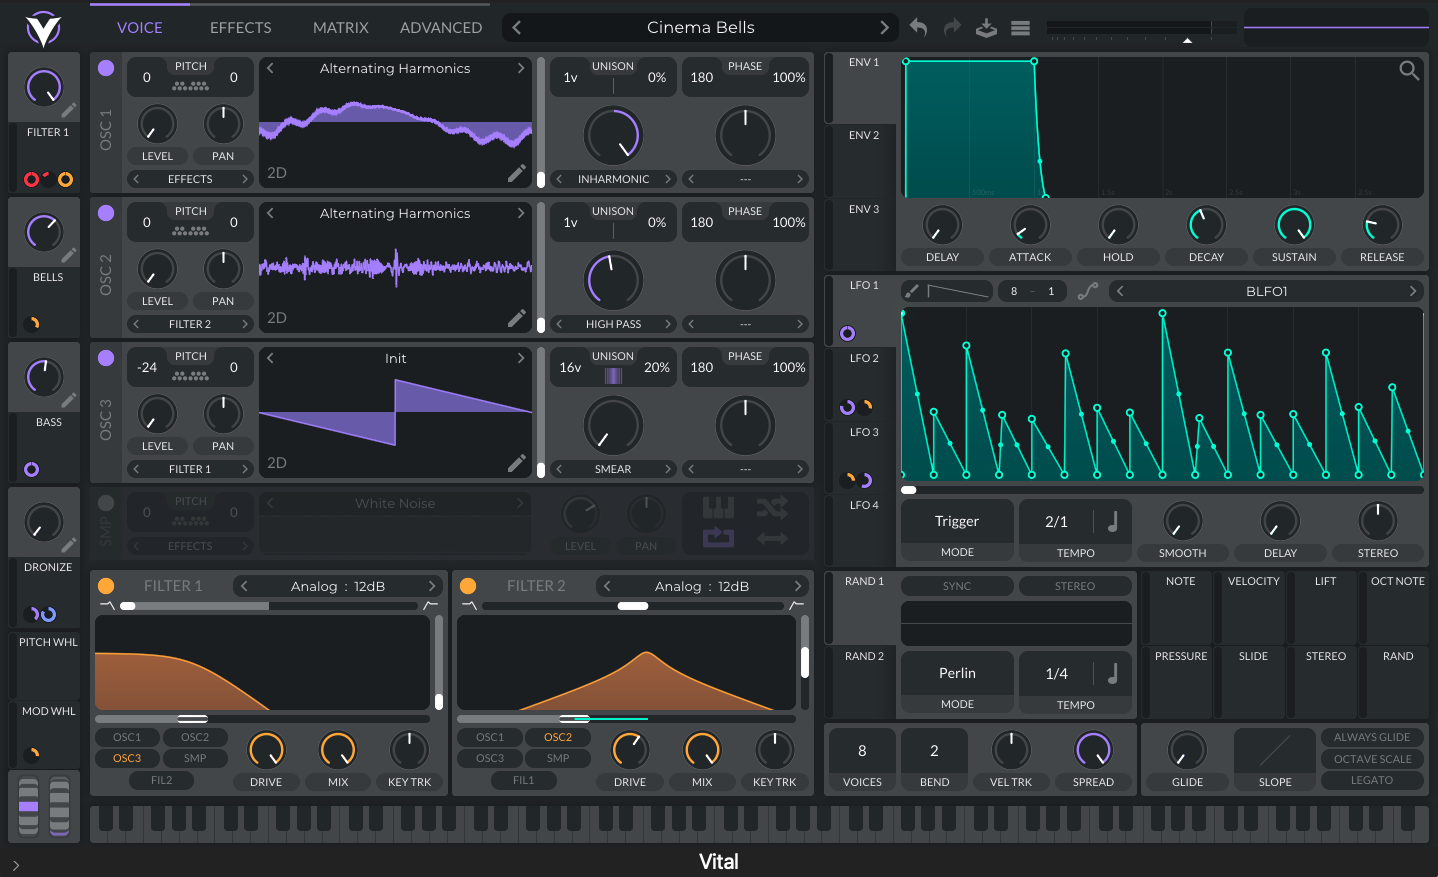 Vital synth by Video Audio